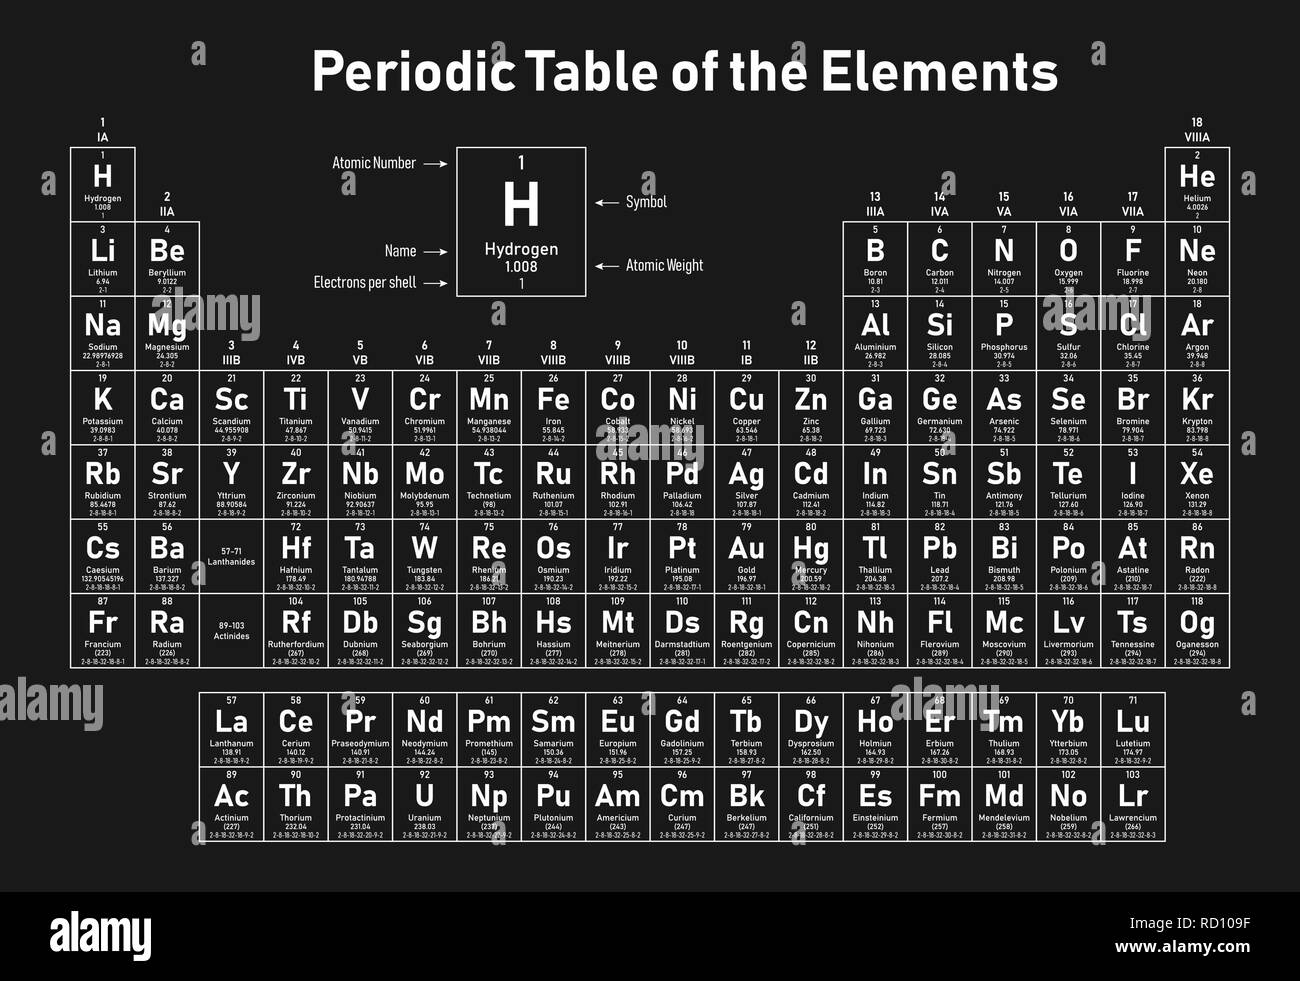 Periodic Table of the Elements - shows atomic number, symbol, name ...